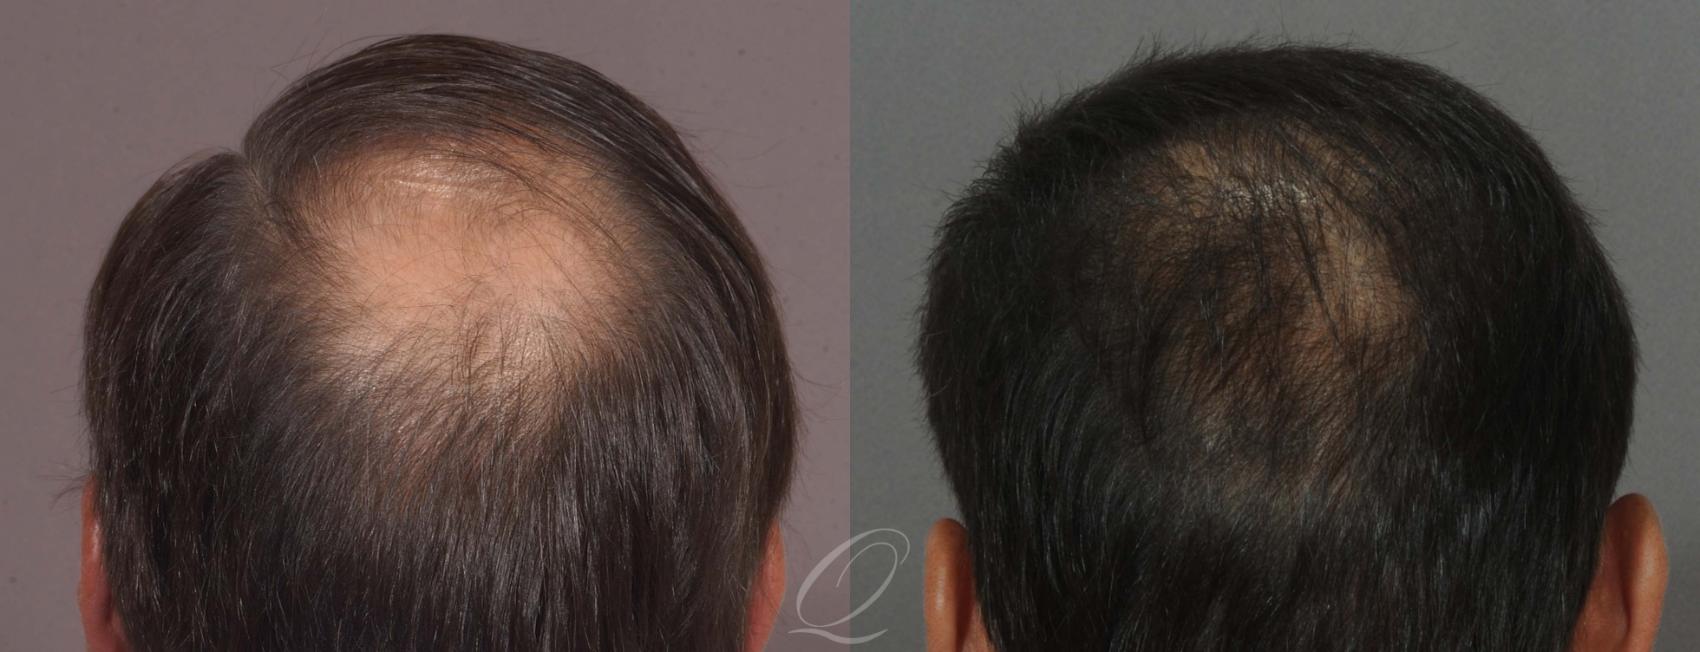 FUT Case 1029 Before & After View #5 | Rochester, NY | Quatela Center for Hair Restoration